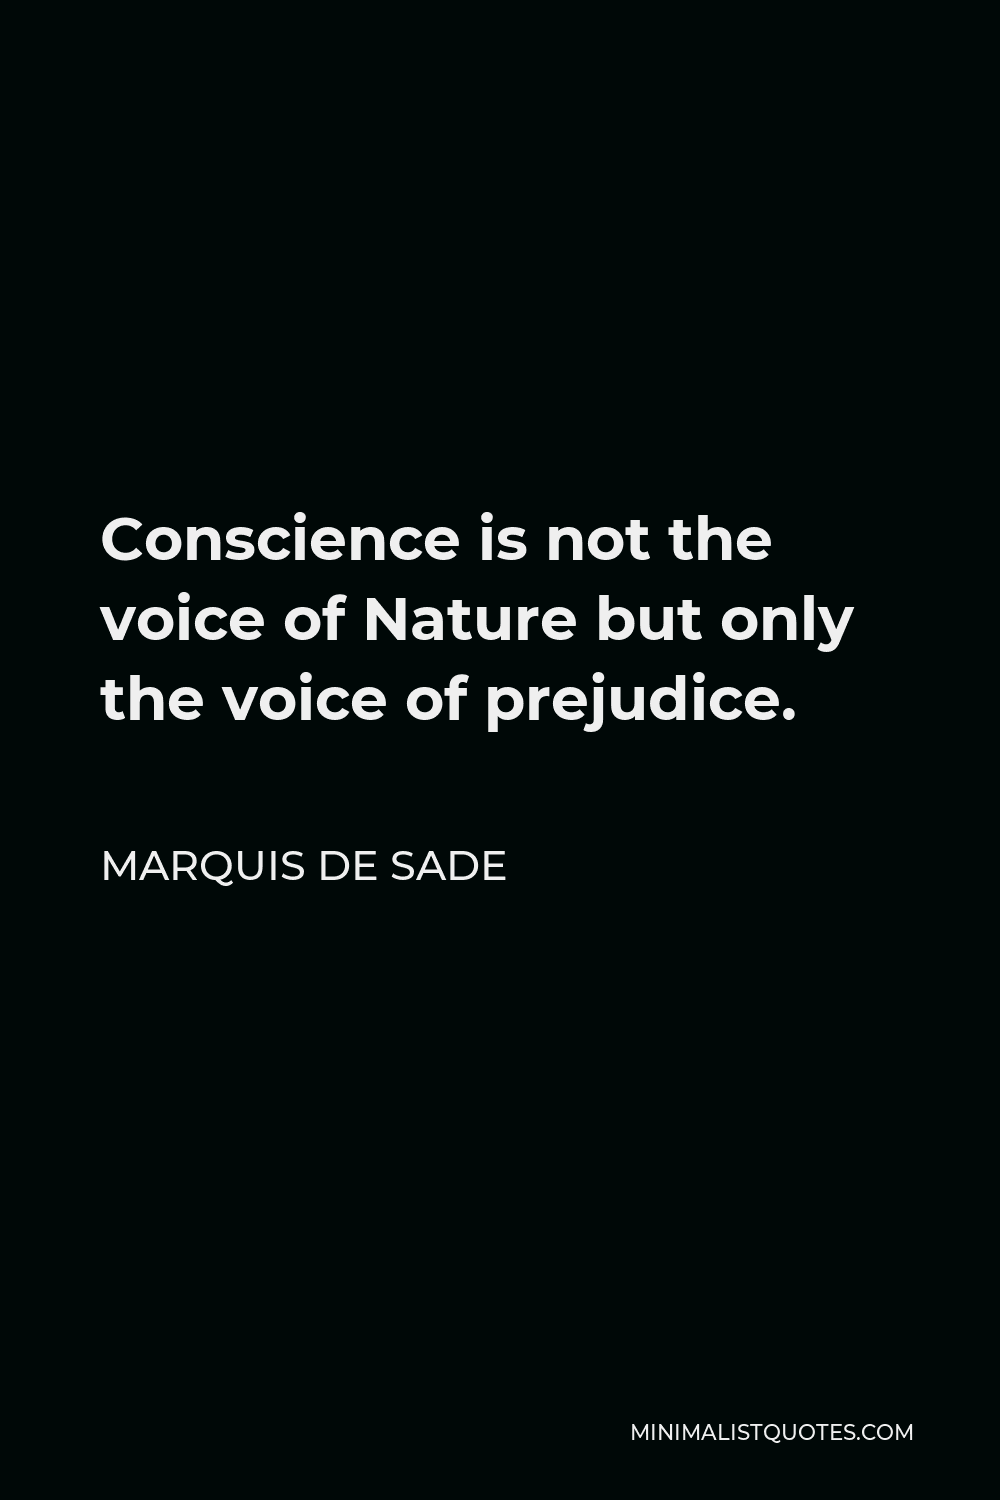 Marquis de Sade Quote - Conscience is not the voice of Nature but only the voice of prejudice.